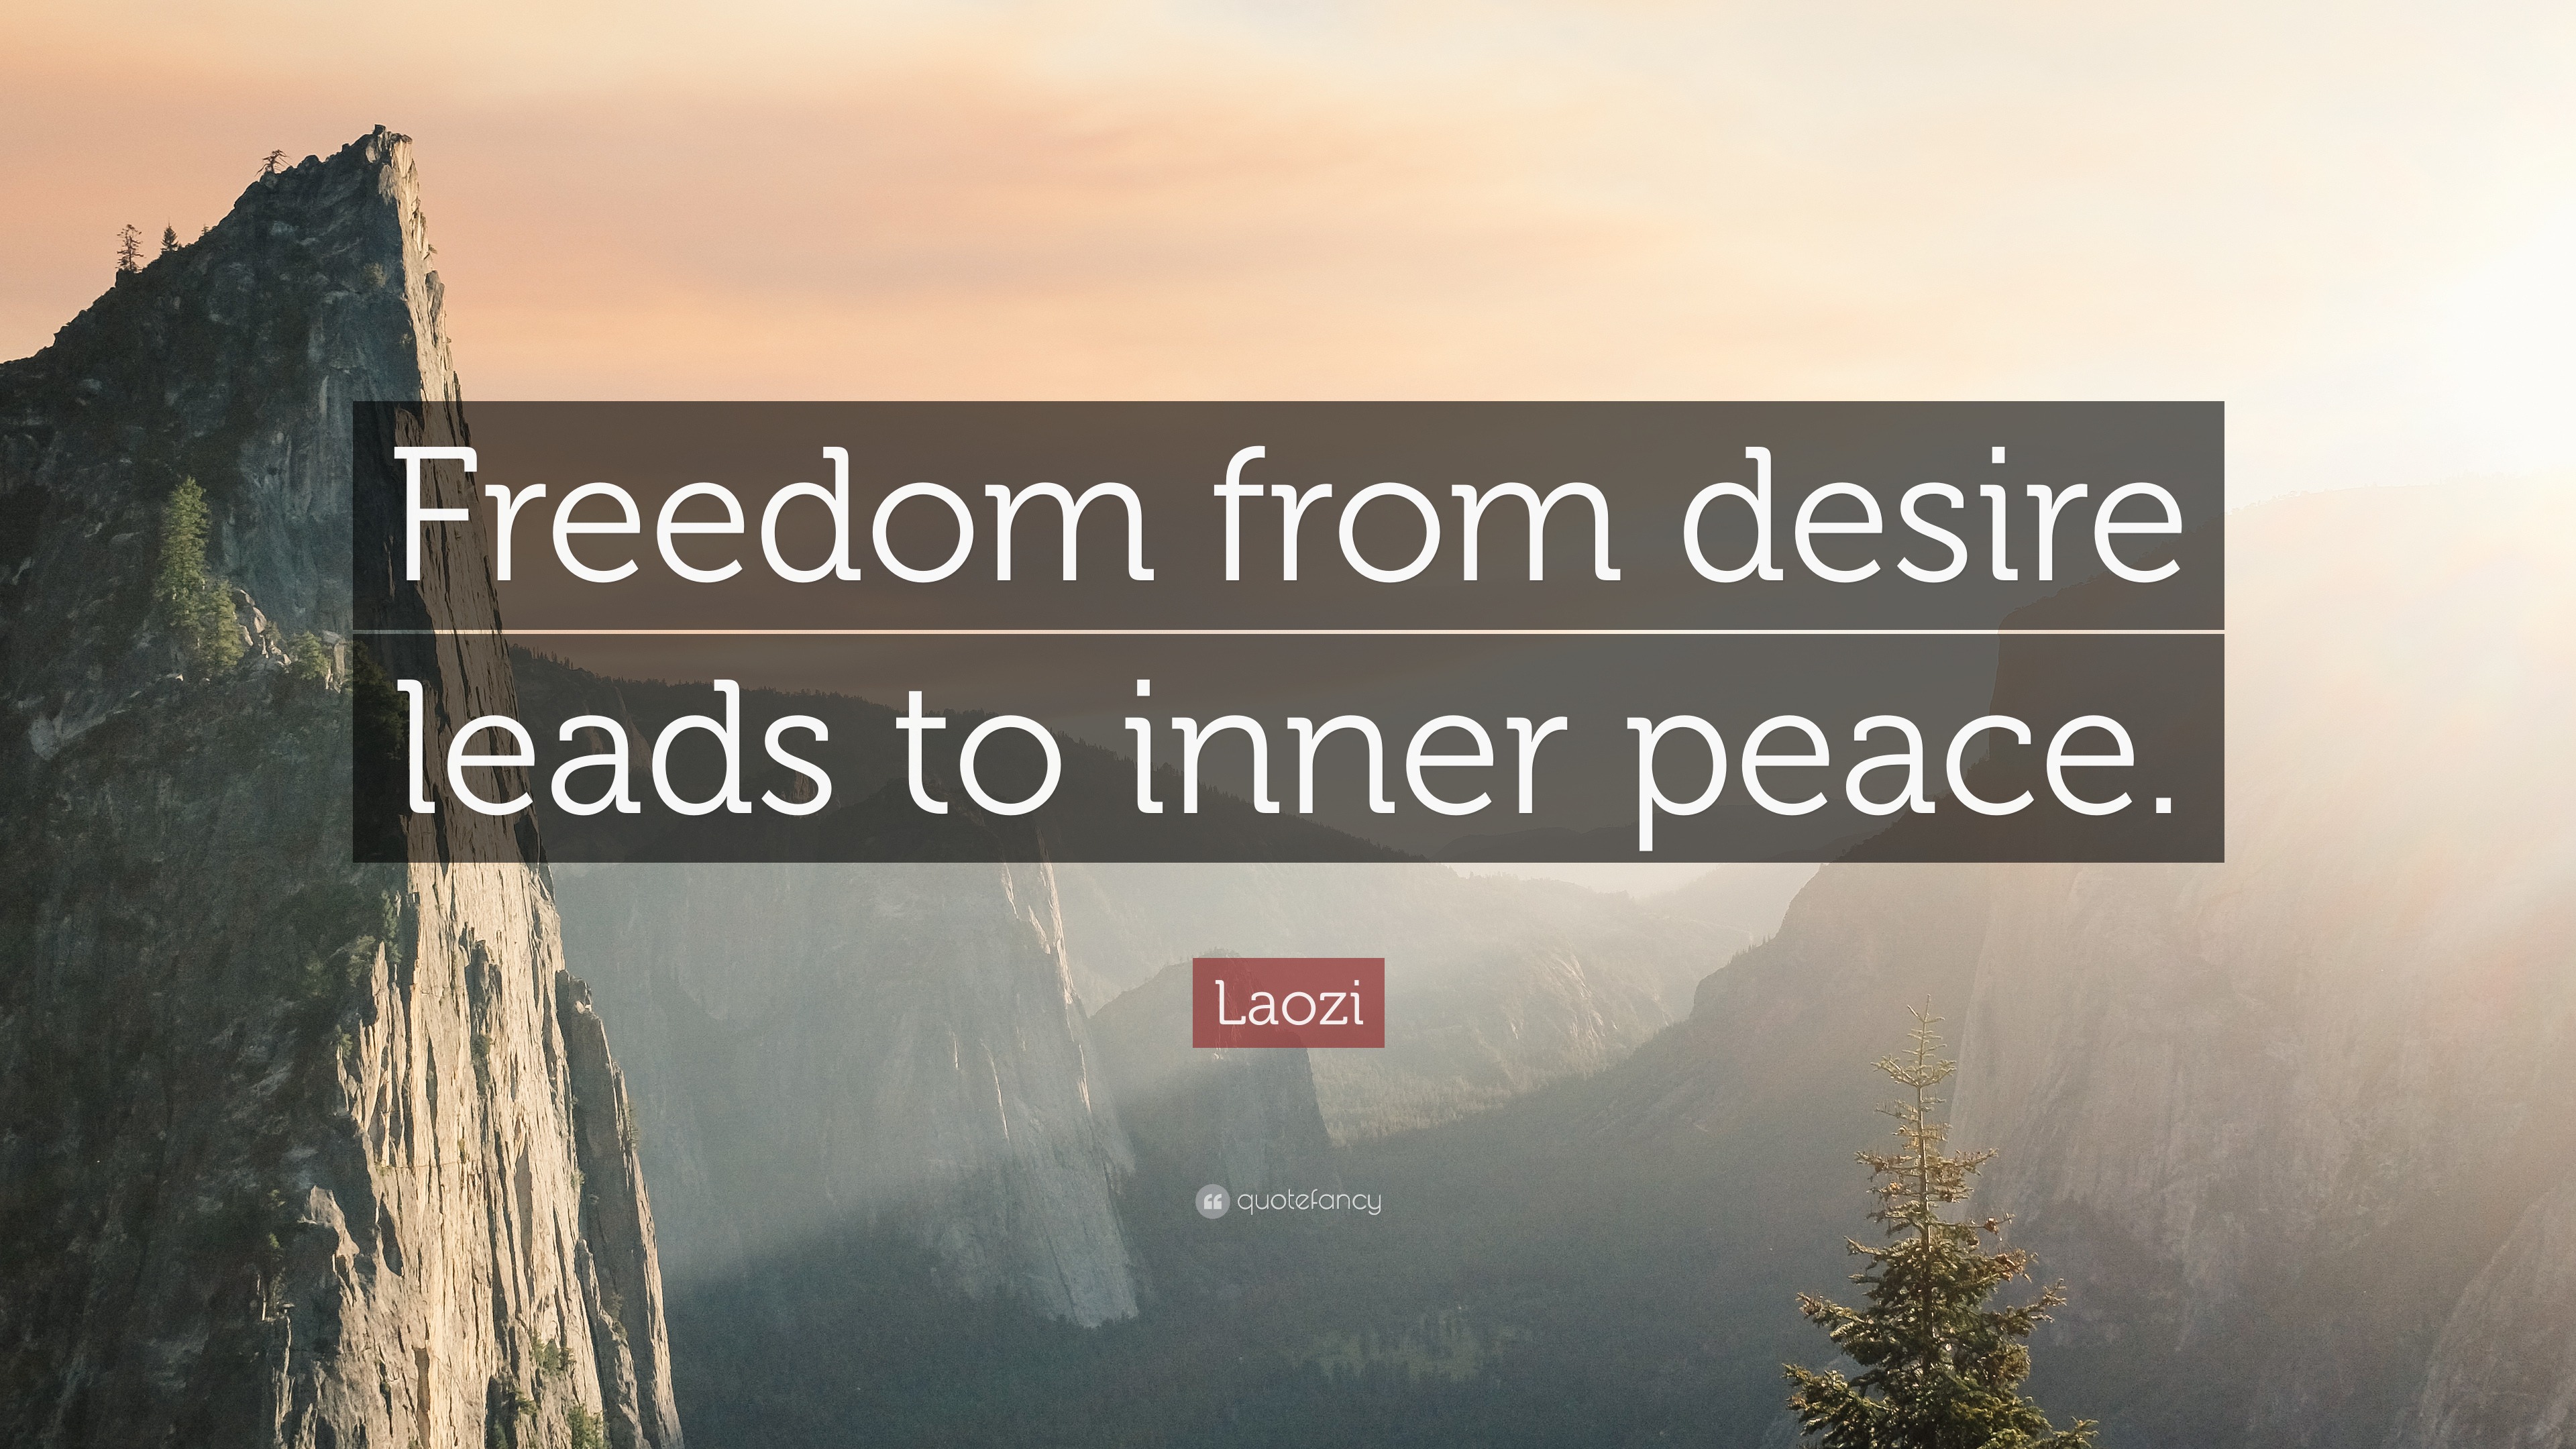 Laozi Quote: “Freedom from desire leads to inner peace.”